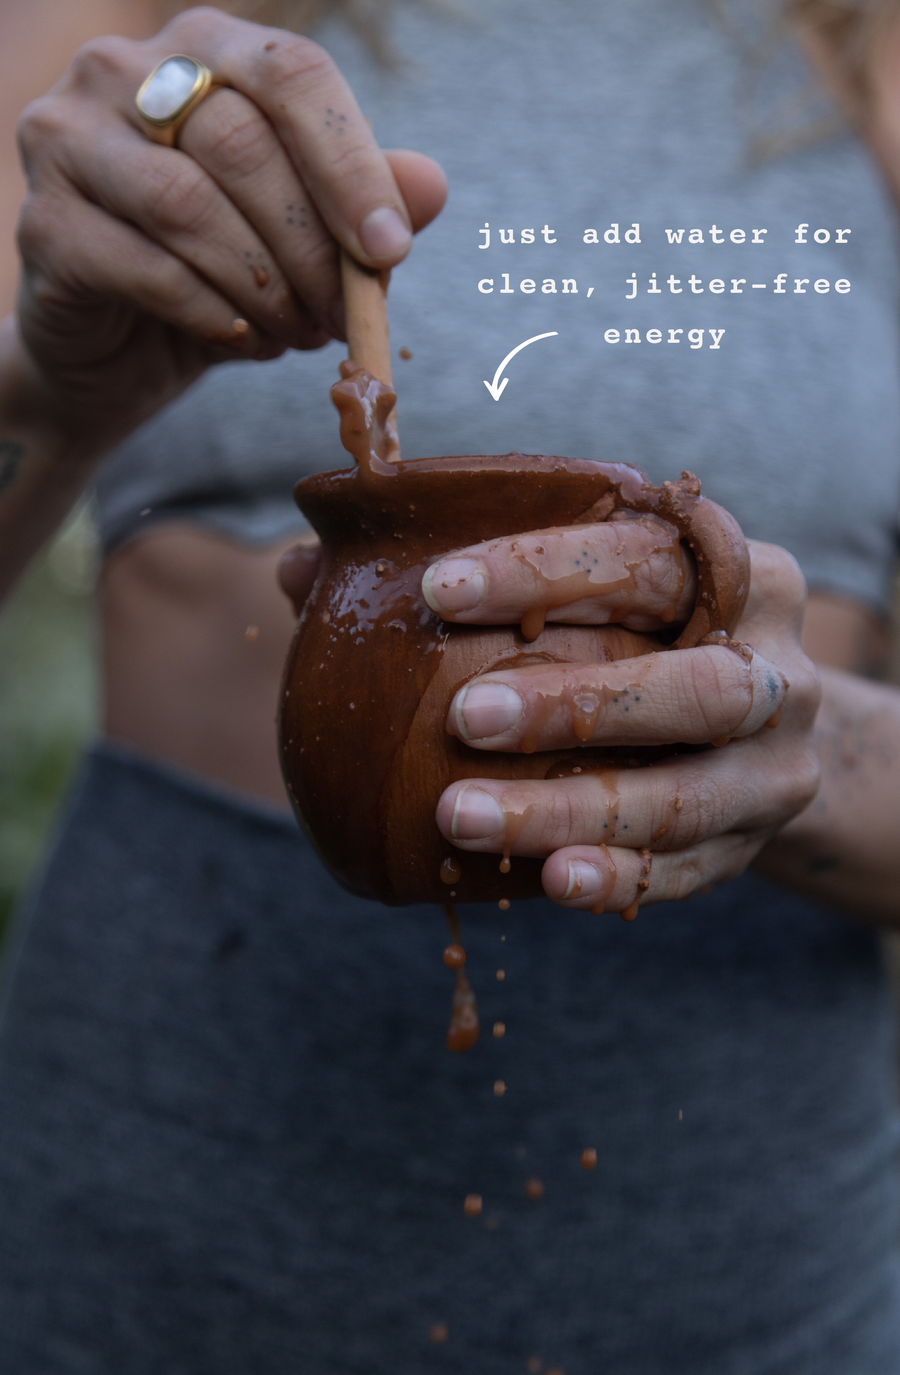 earthy energy, adaptogen cacao + functional mushrooms - just add water for clean, jitter-free energy